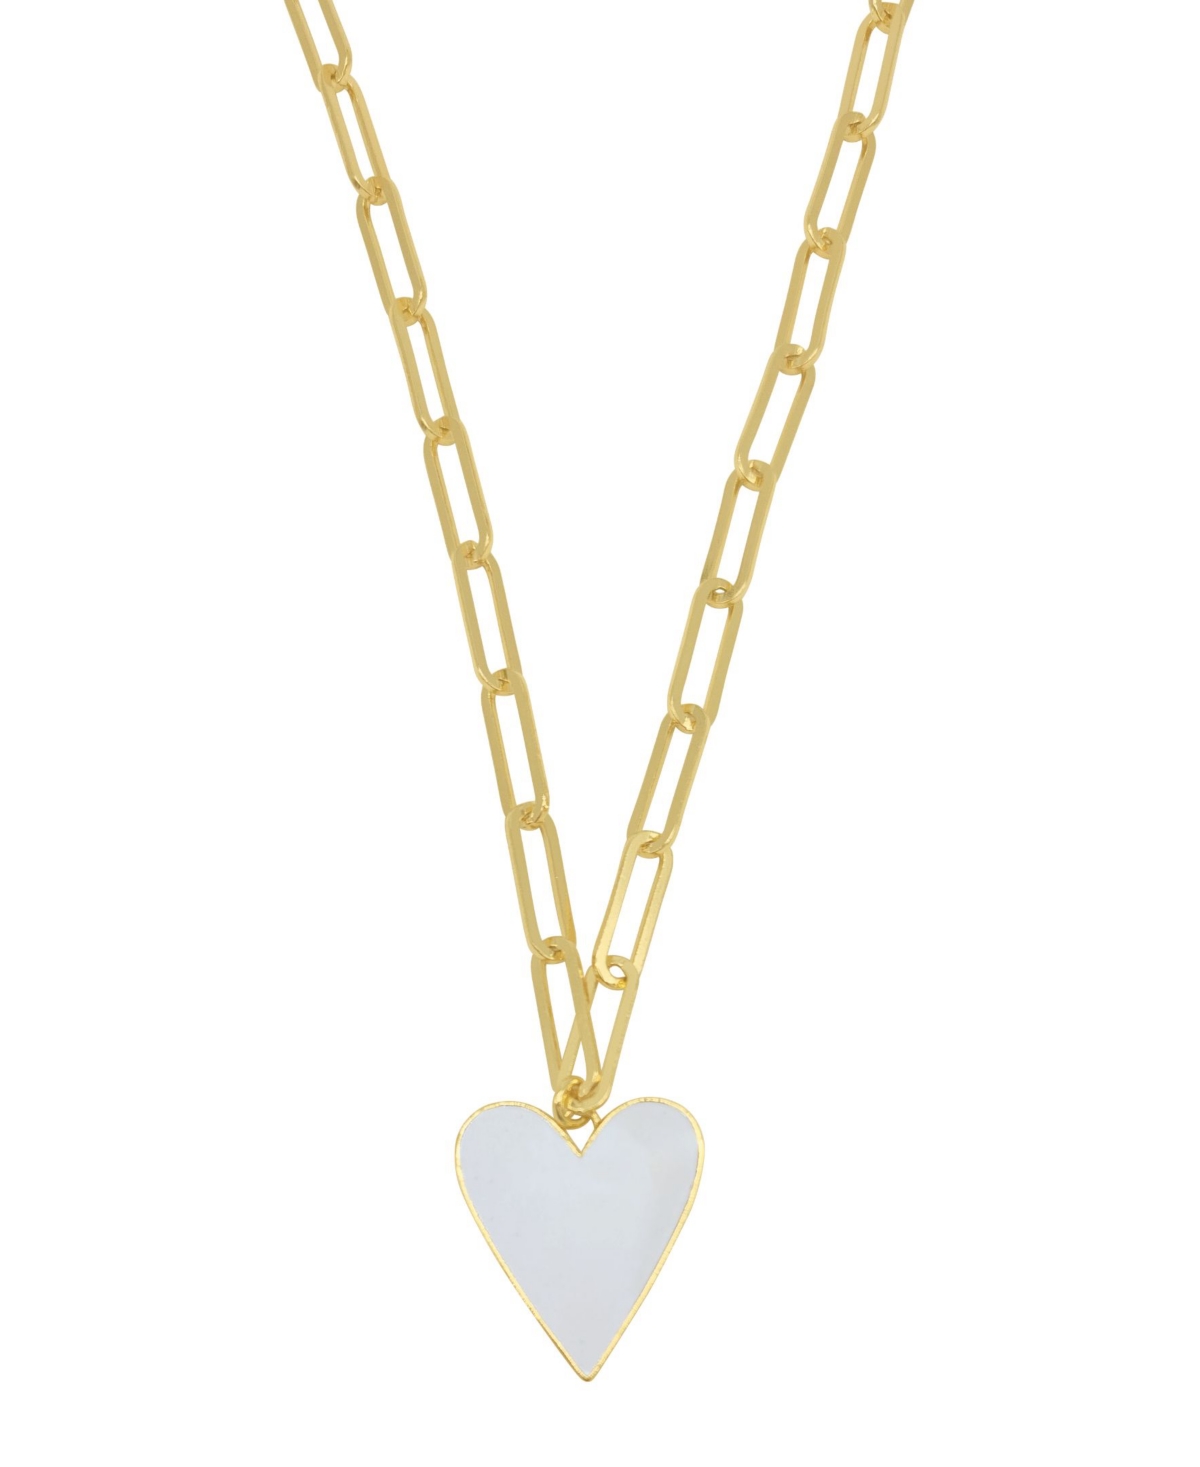 20-22" Adjustable 14K Gold Plated White Enamel Heart Paper Clip Chain Necklace - White